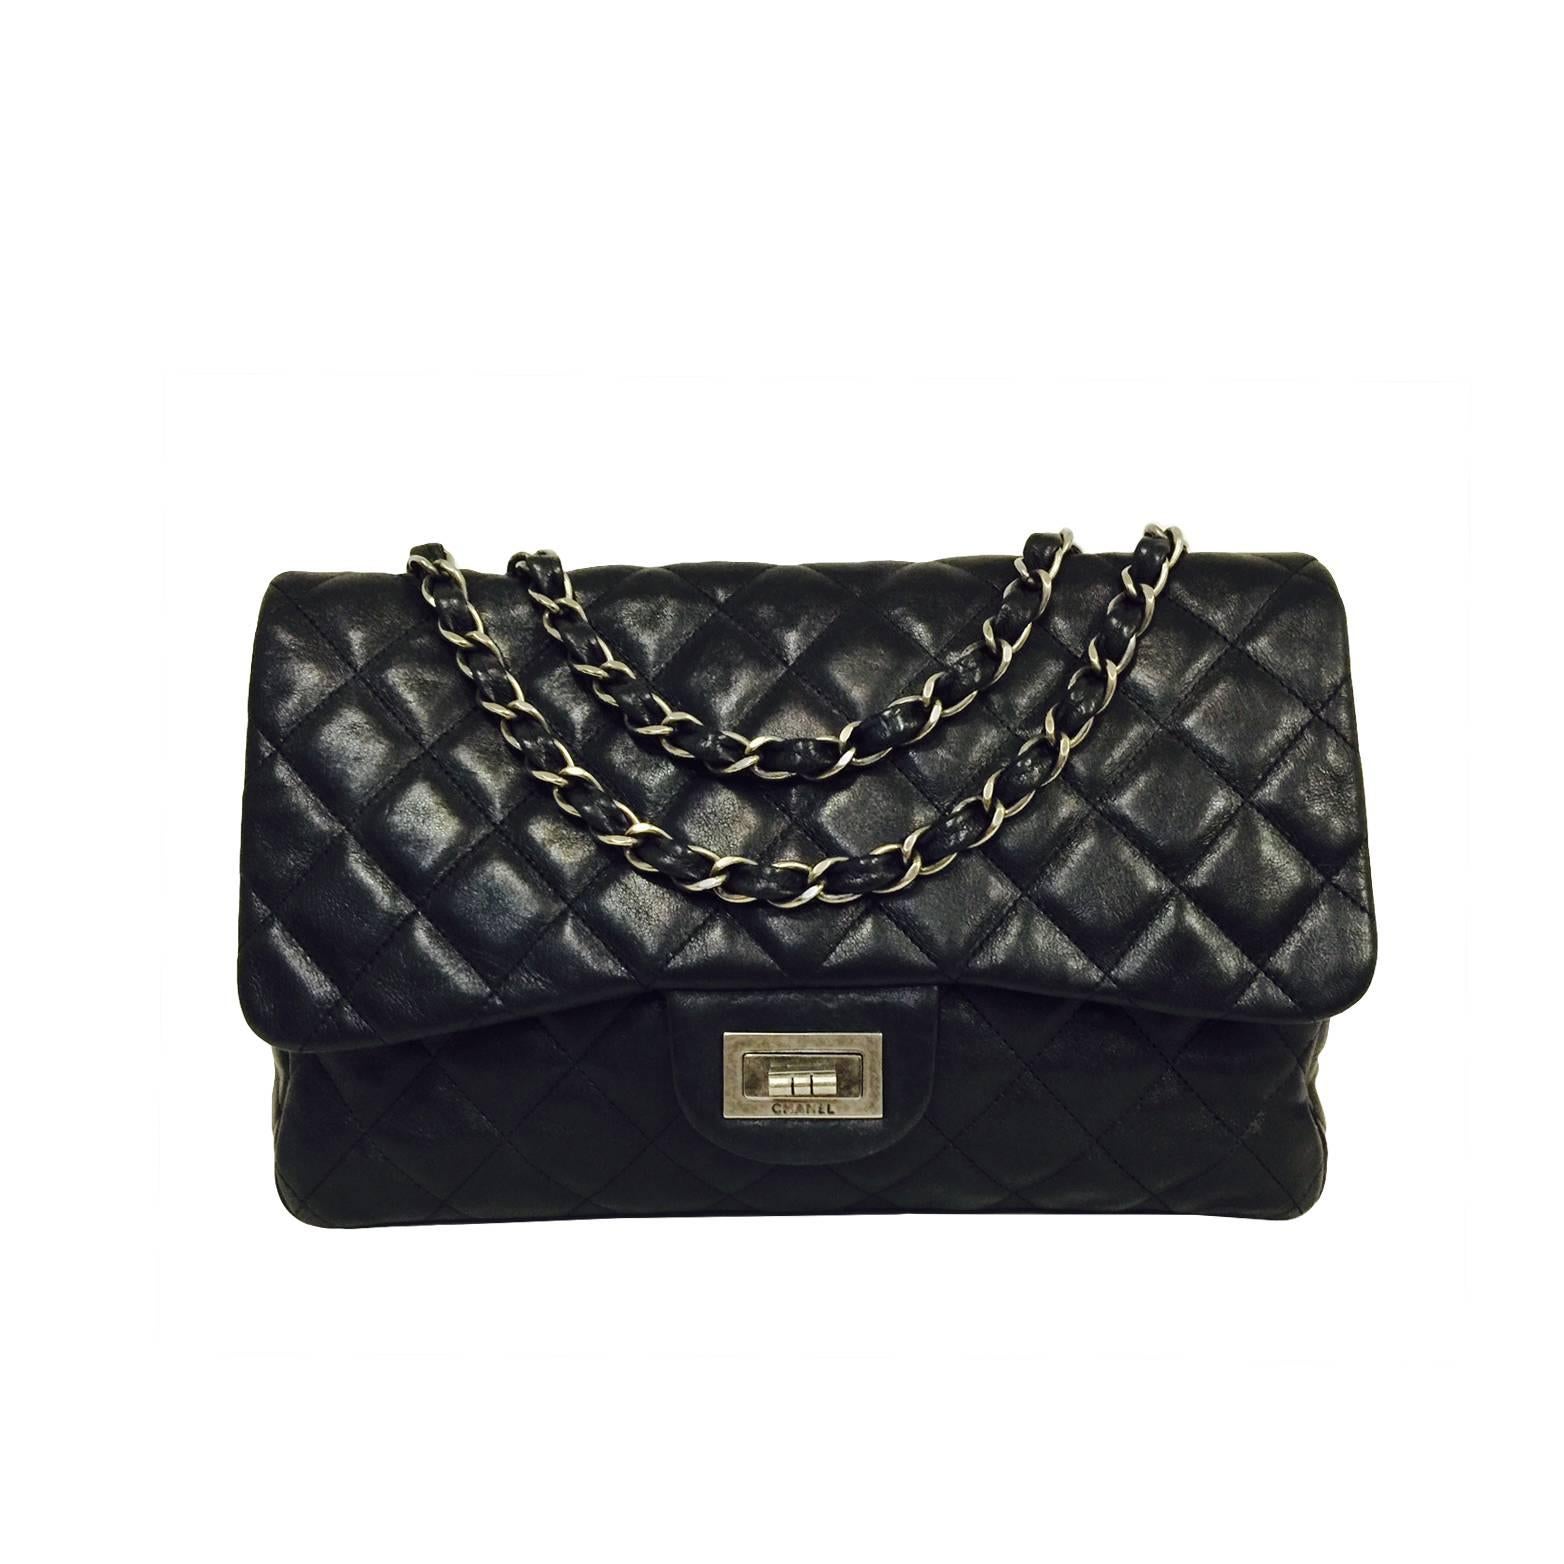 Chanel 2.55 Reissue Bag Size 226 in Black Quilted Lambskin For Sale